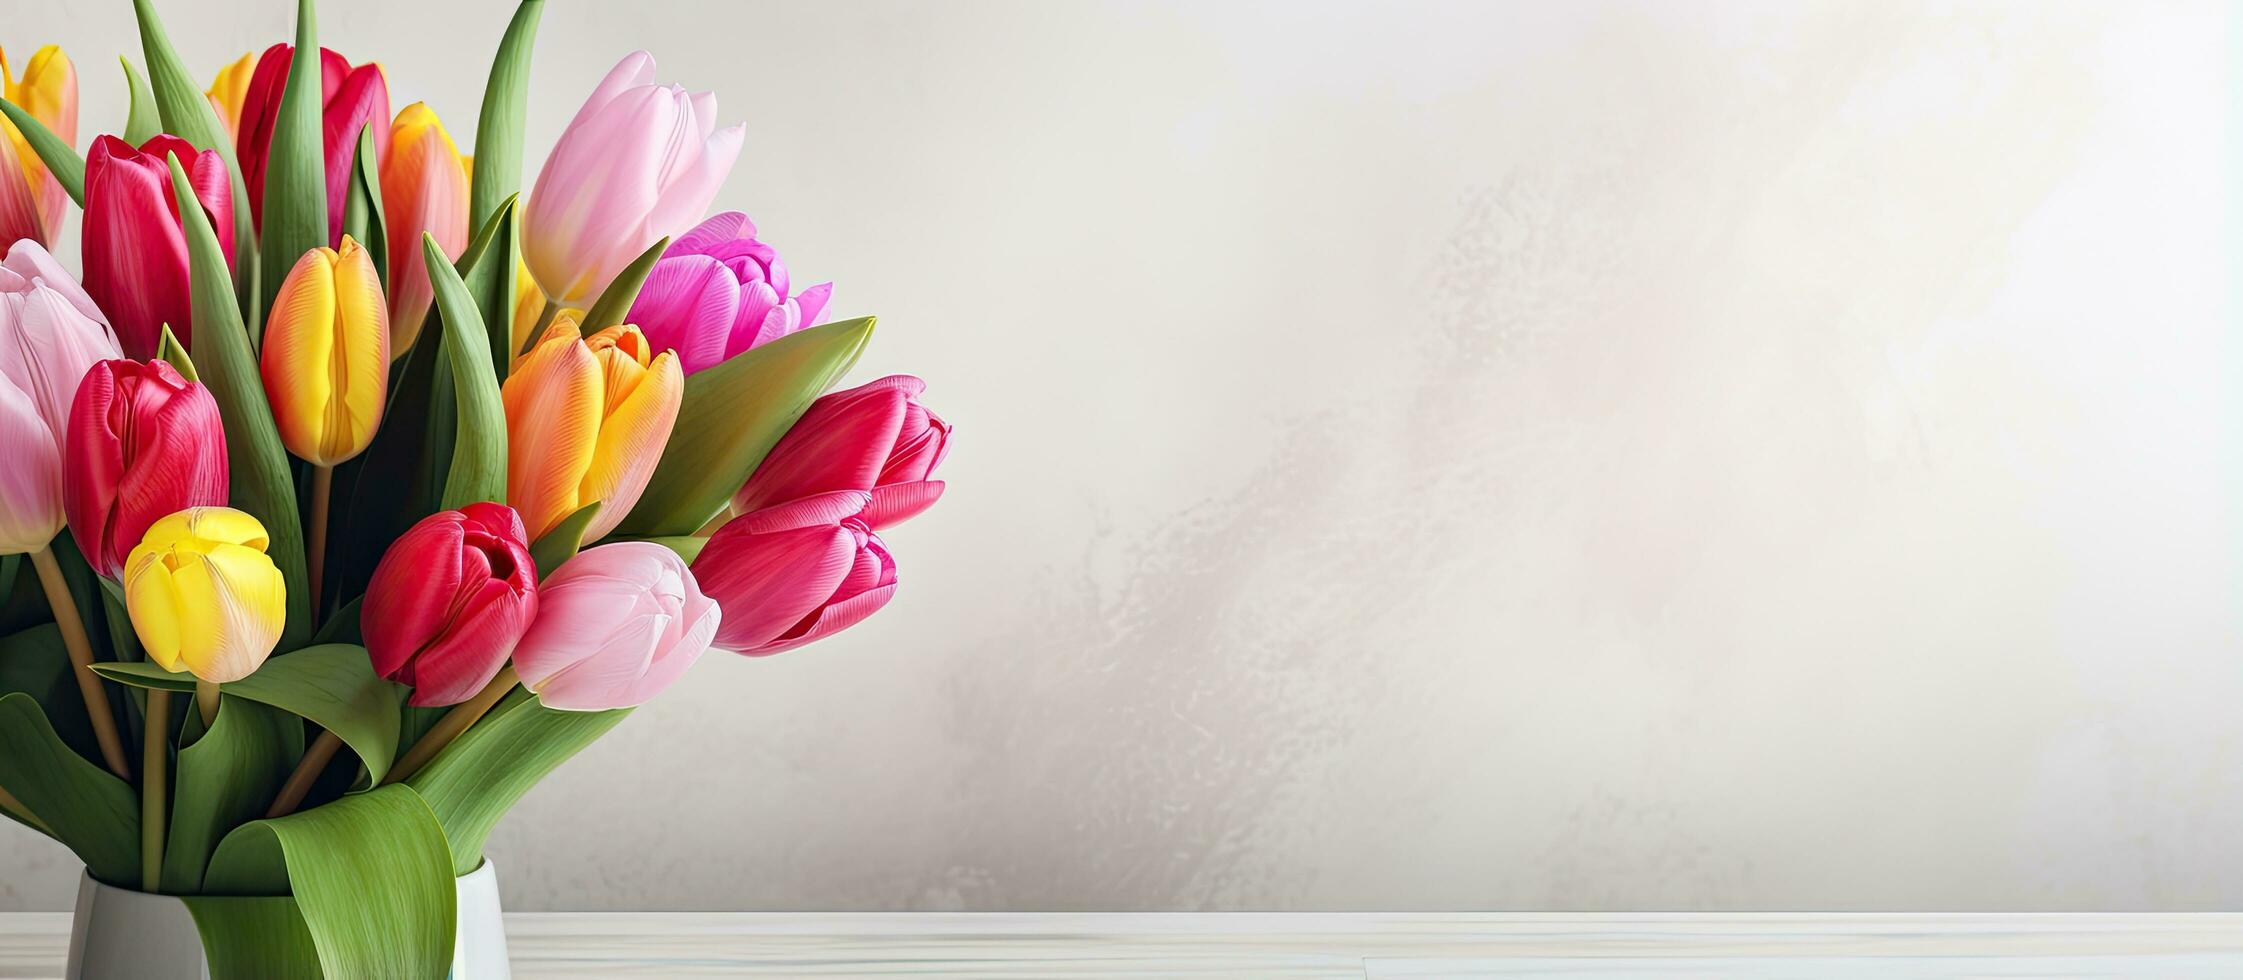 Tulip flowers in a vase by a bright room wall photo